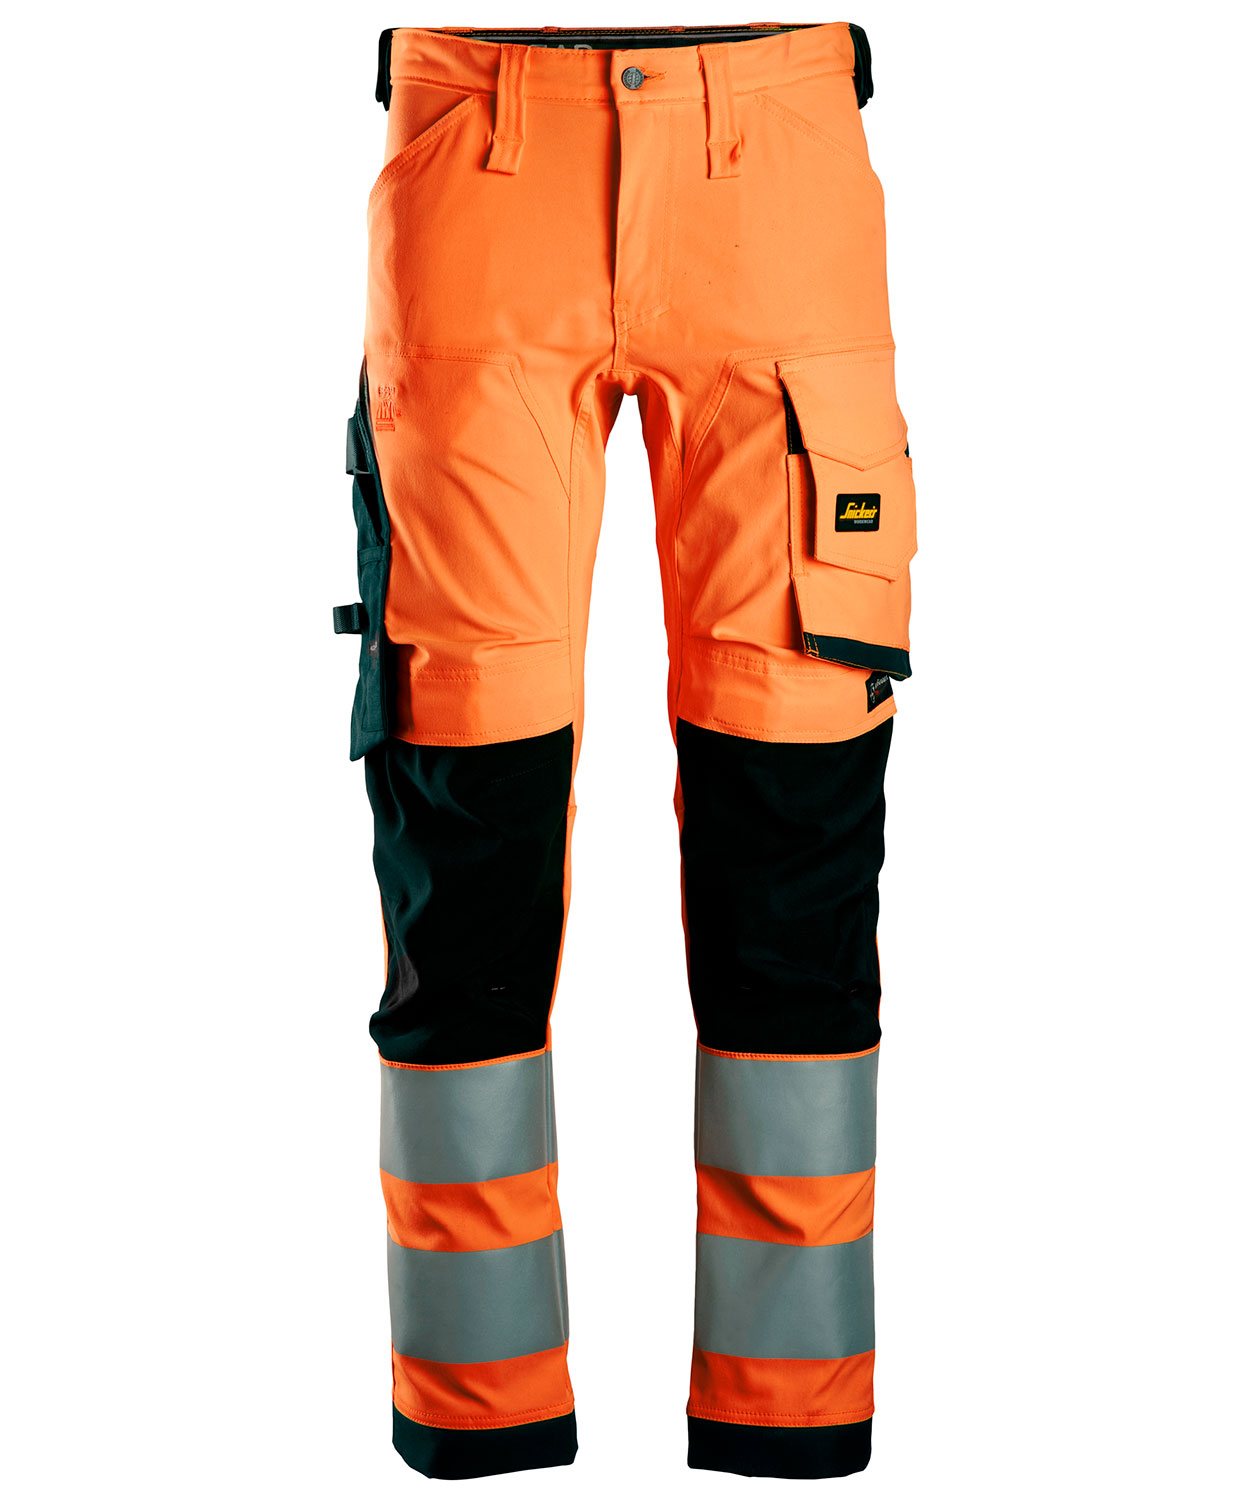 Snickers Workwear | KneeGuard - PHPI Online